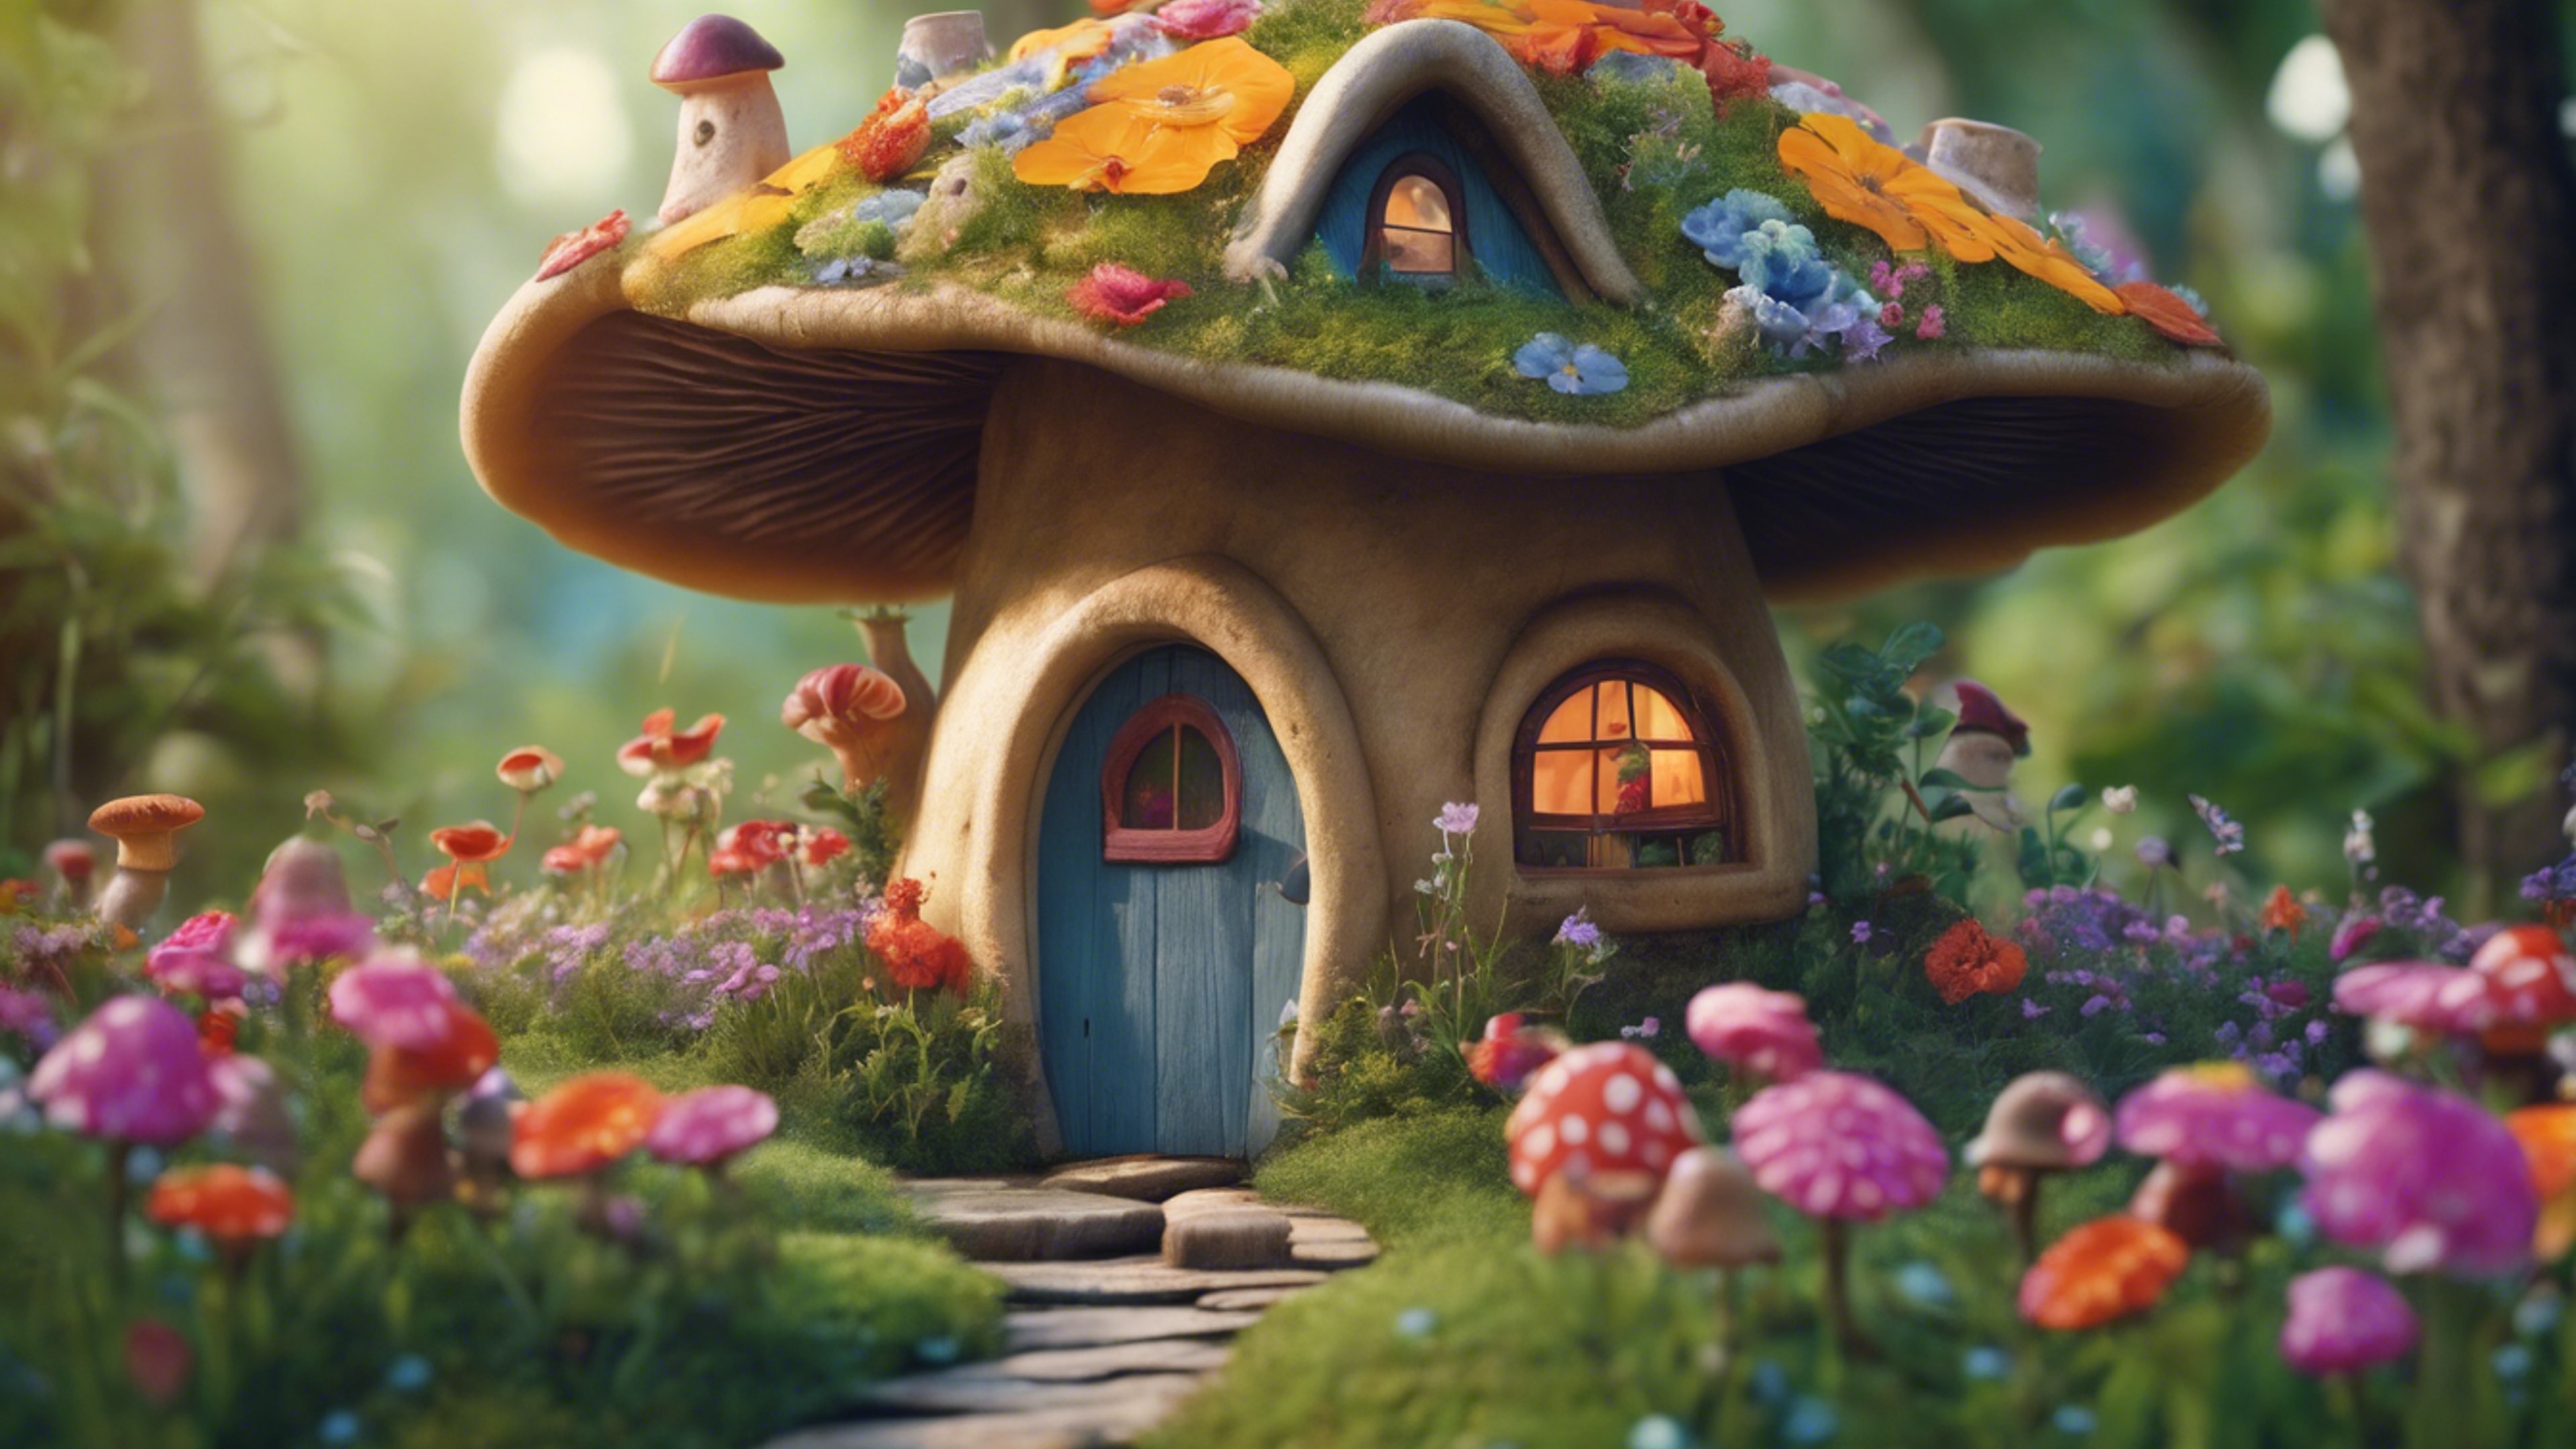 An old-fashioned, whimsical mushroom house, straight out of a children's storybook, nestled amid colorful flowers at the end of a winding path. Тапет[bbbff29f860842789321]